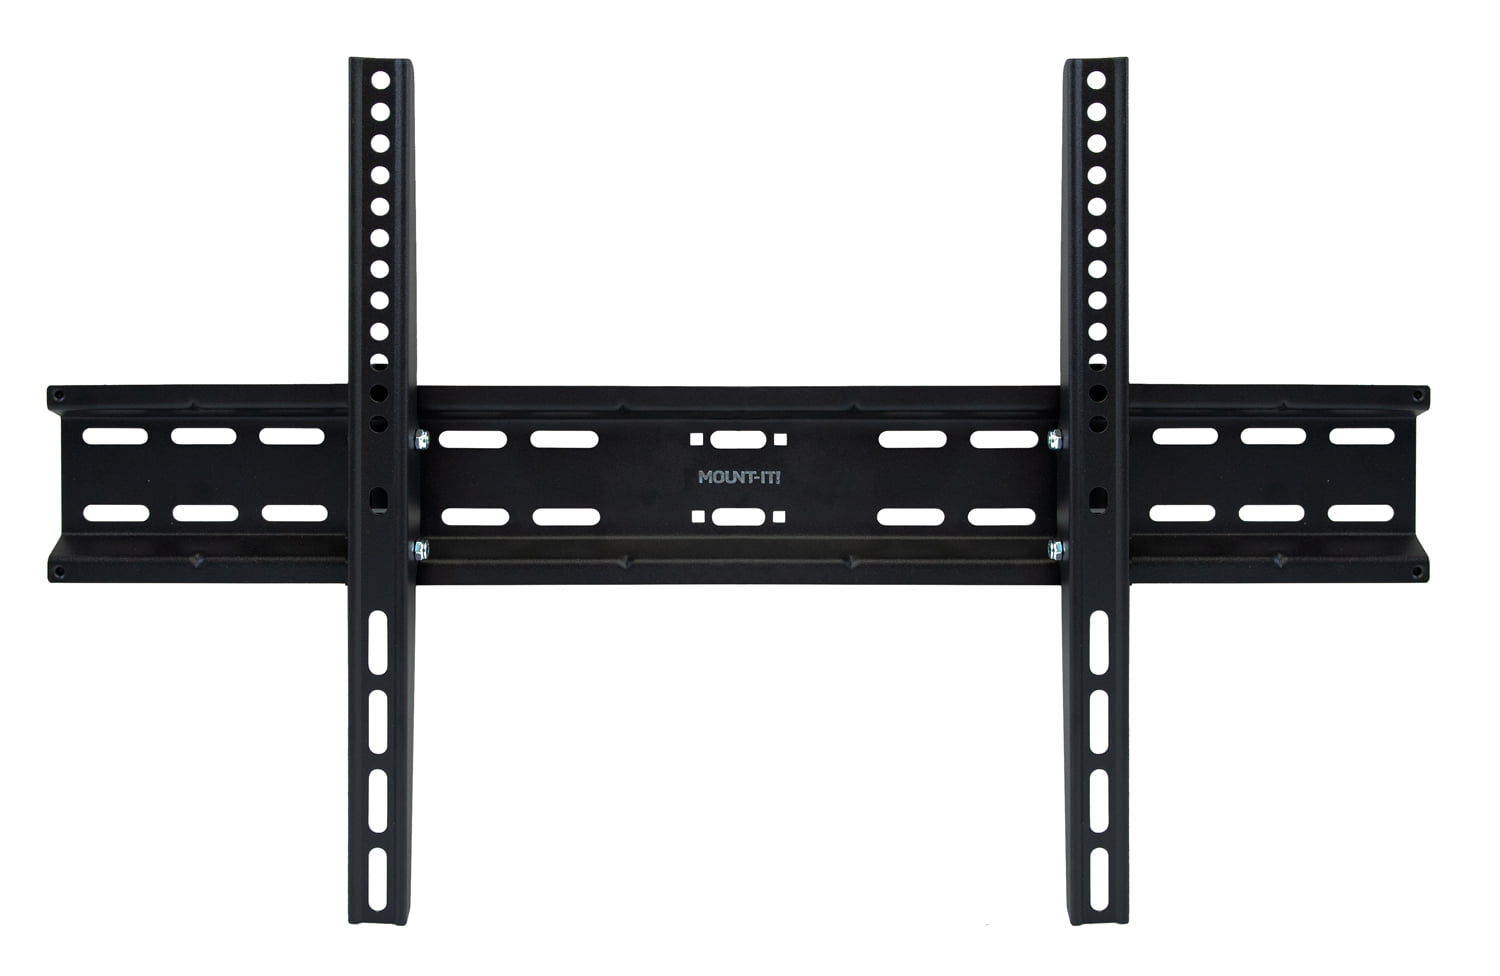  INLAND 37-70 inch TV Wall Mount (5336-A) Tilt with 8 Degree for  TV Flat Panel/LED/LCD, Max Load 77 lbs for Samsung, Sony, Panasonic, LG,  Toshiba, etc. TV. Power by ProHT Black